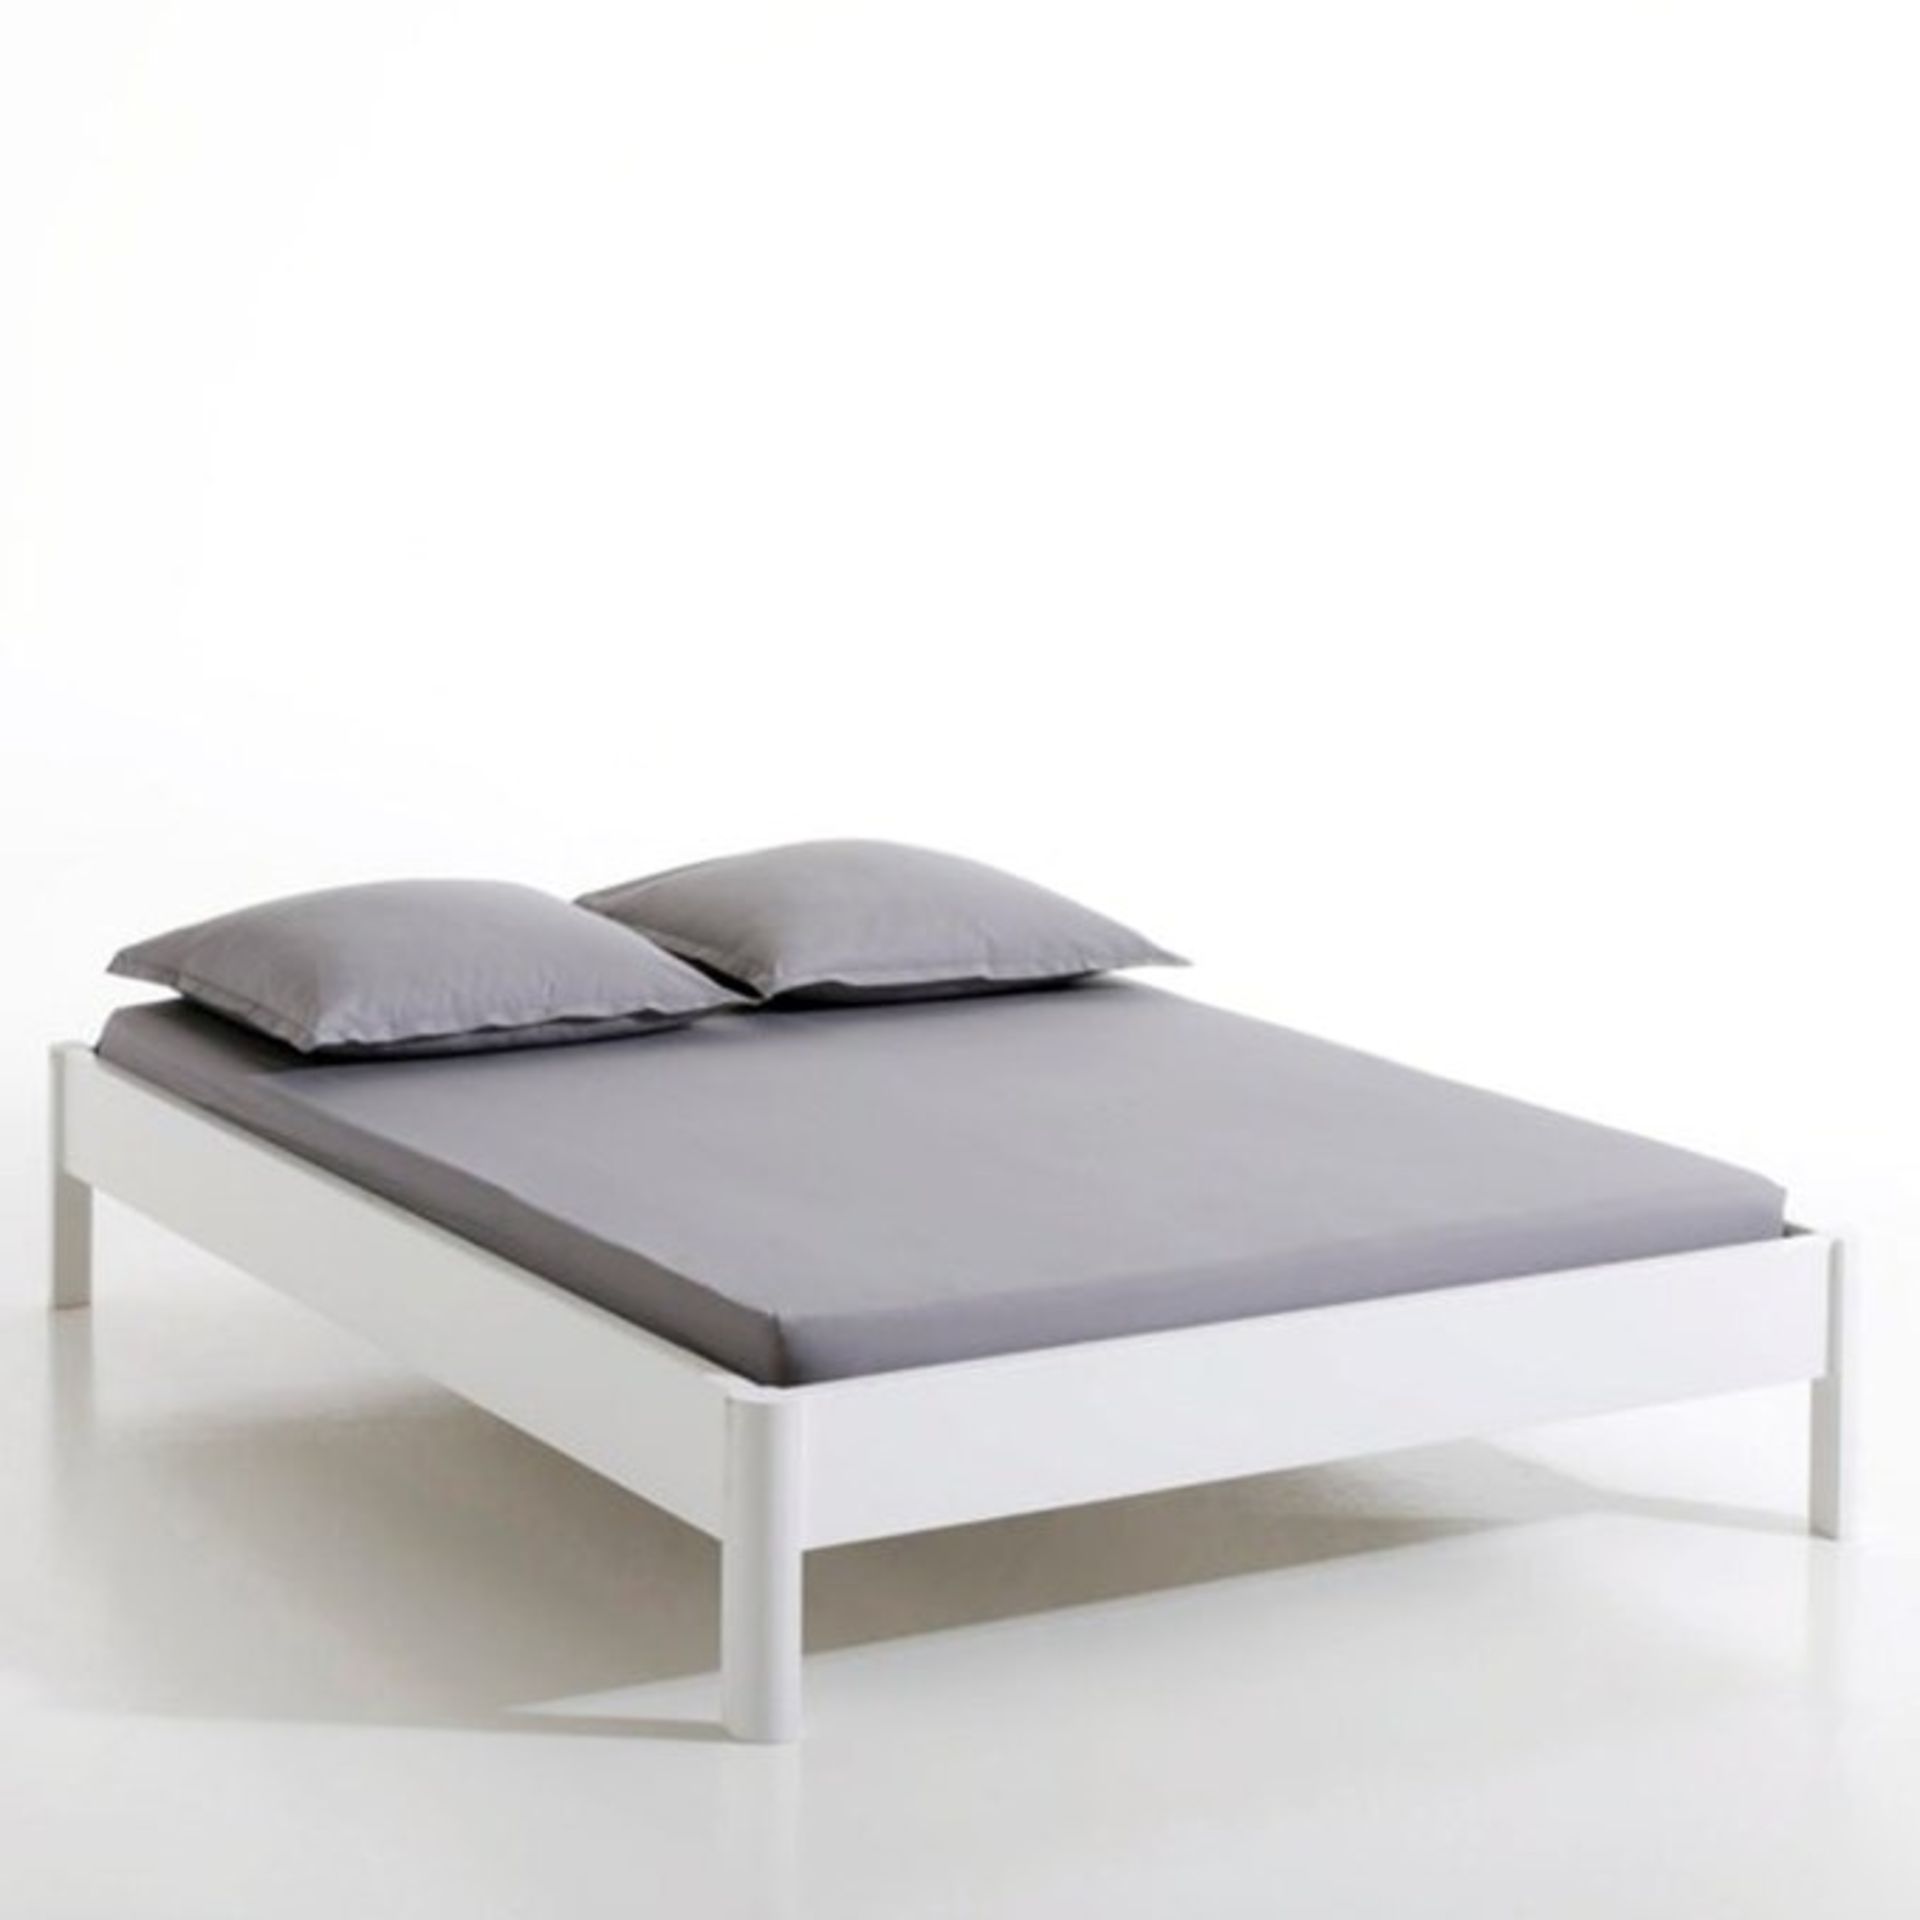 1 GRADE C BOXED ZULDA LACQUERED PINE BED WITH BASE IN WHITE / RRP £375.00 (PUBLIC VIEWING